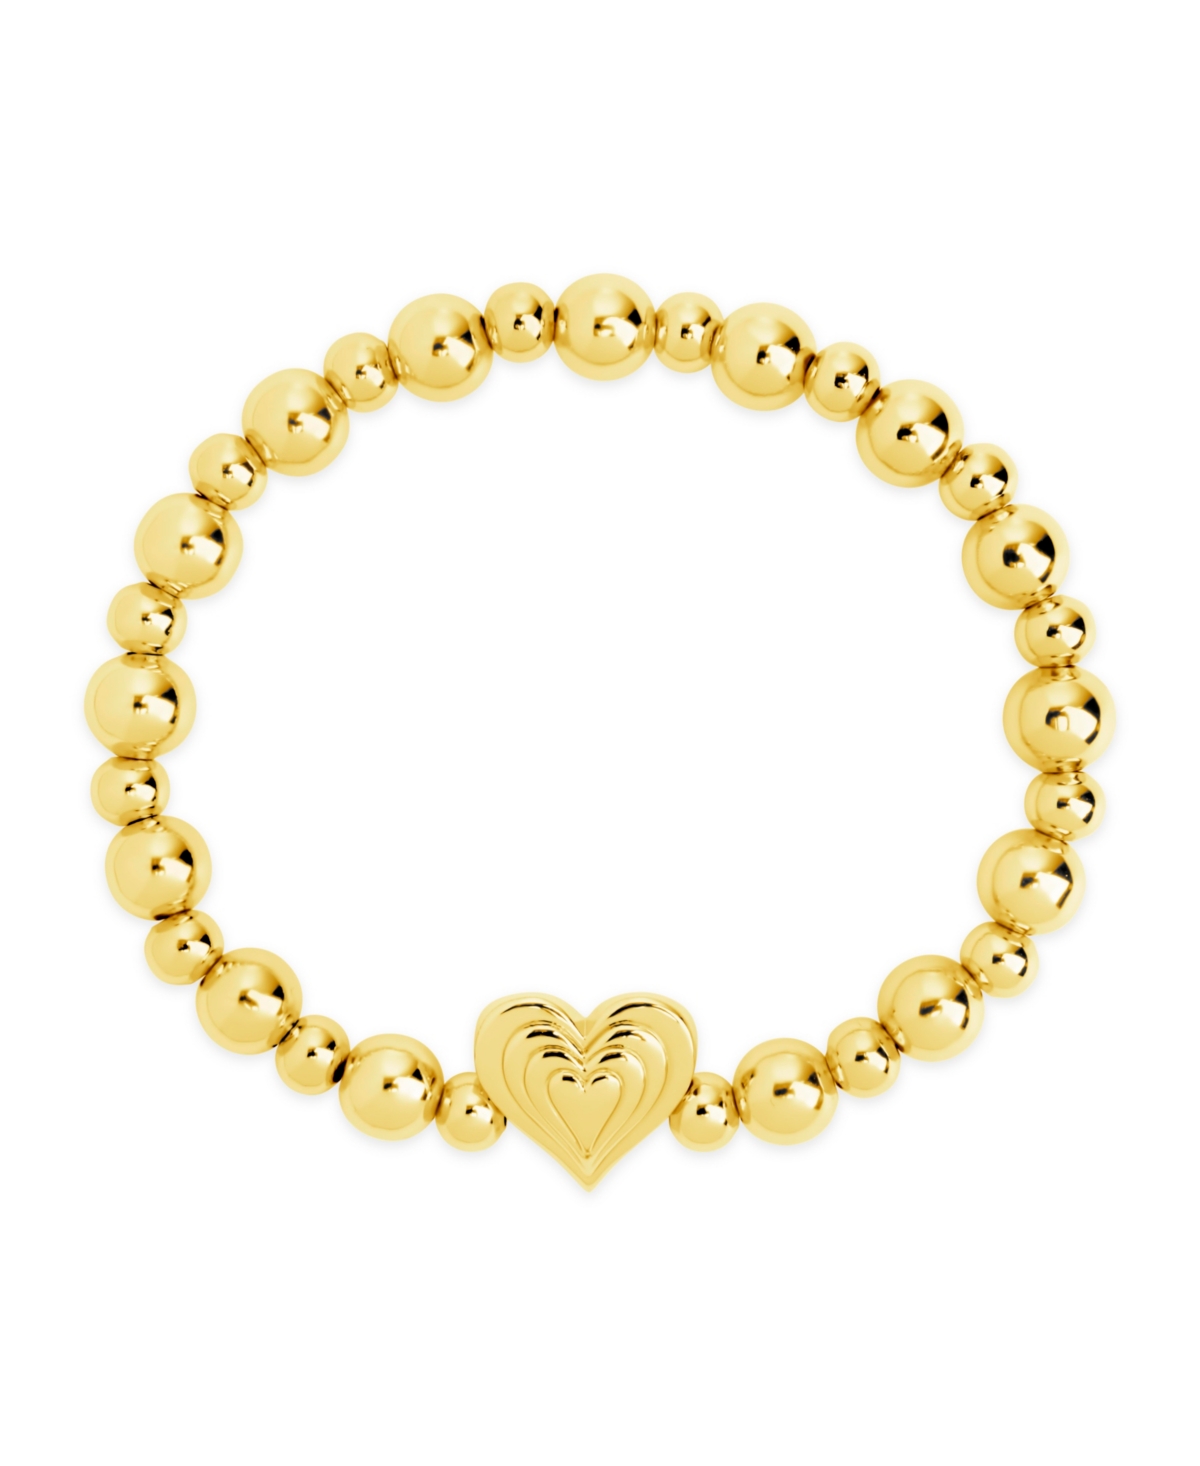 Silver-Tone or Gold-Tone Beating Heart Beaded Bracelet - Gold